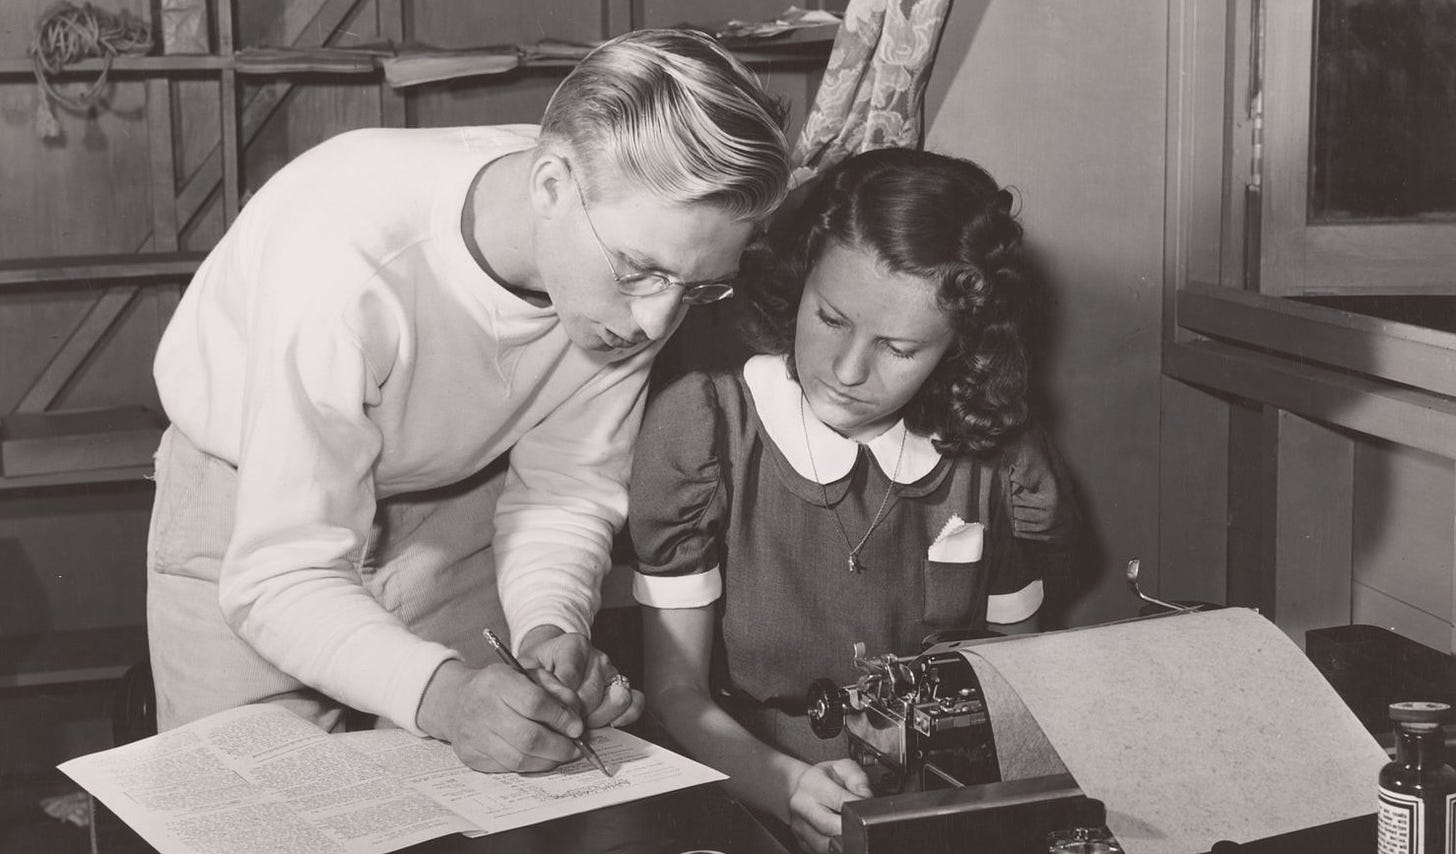 black and white photograph showing an editor standing next to a woman at a typewriter, marking a page while she looks on